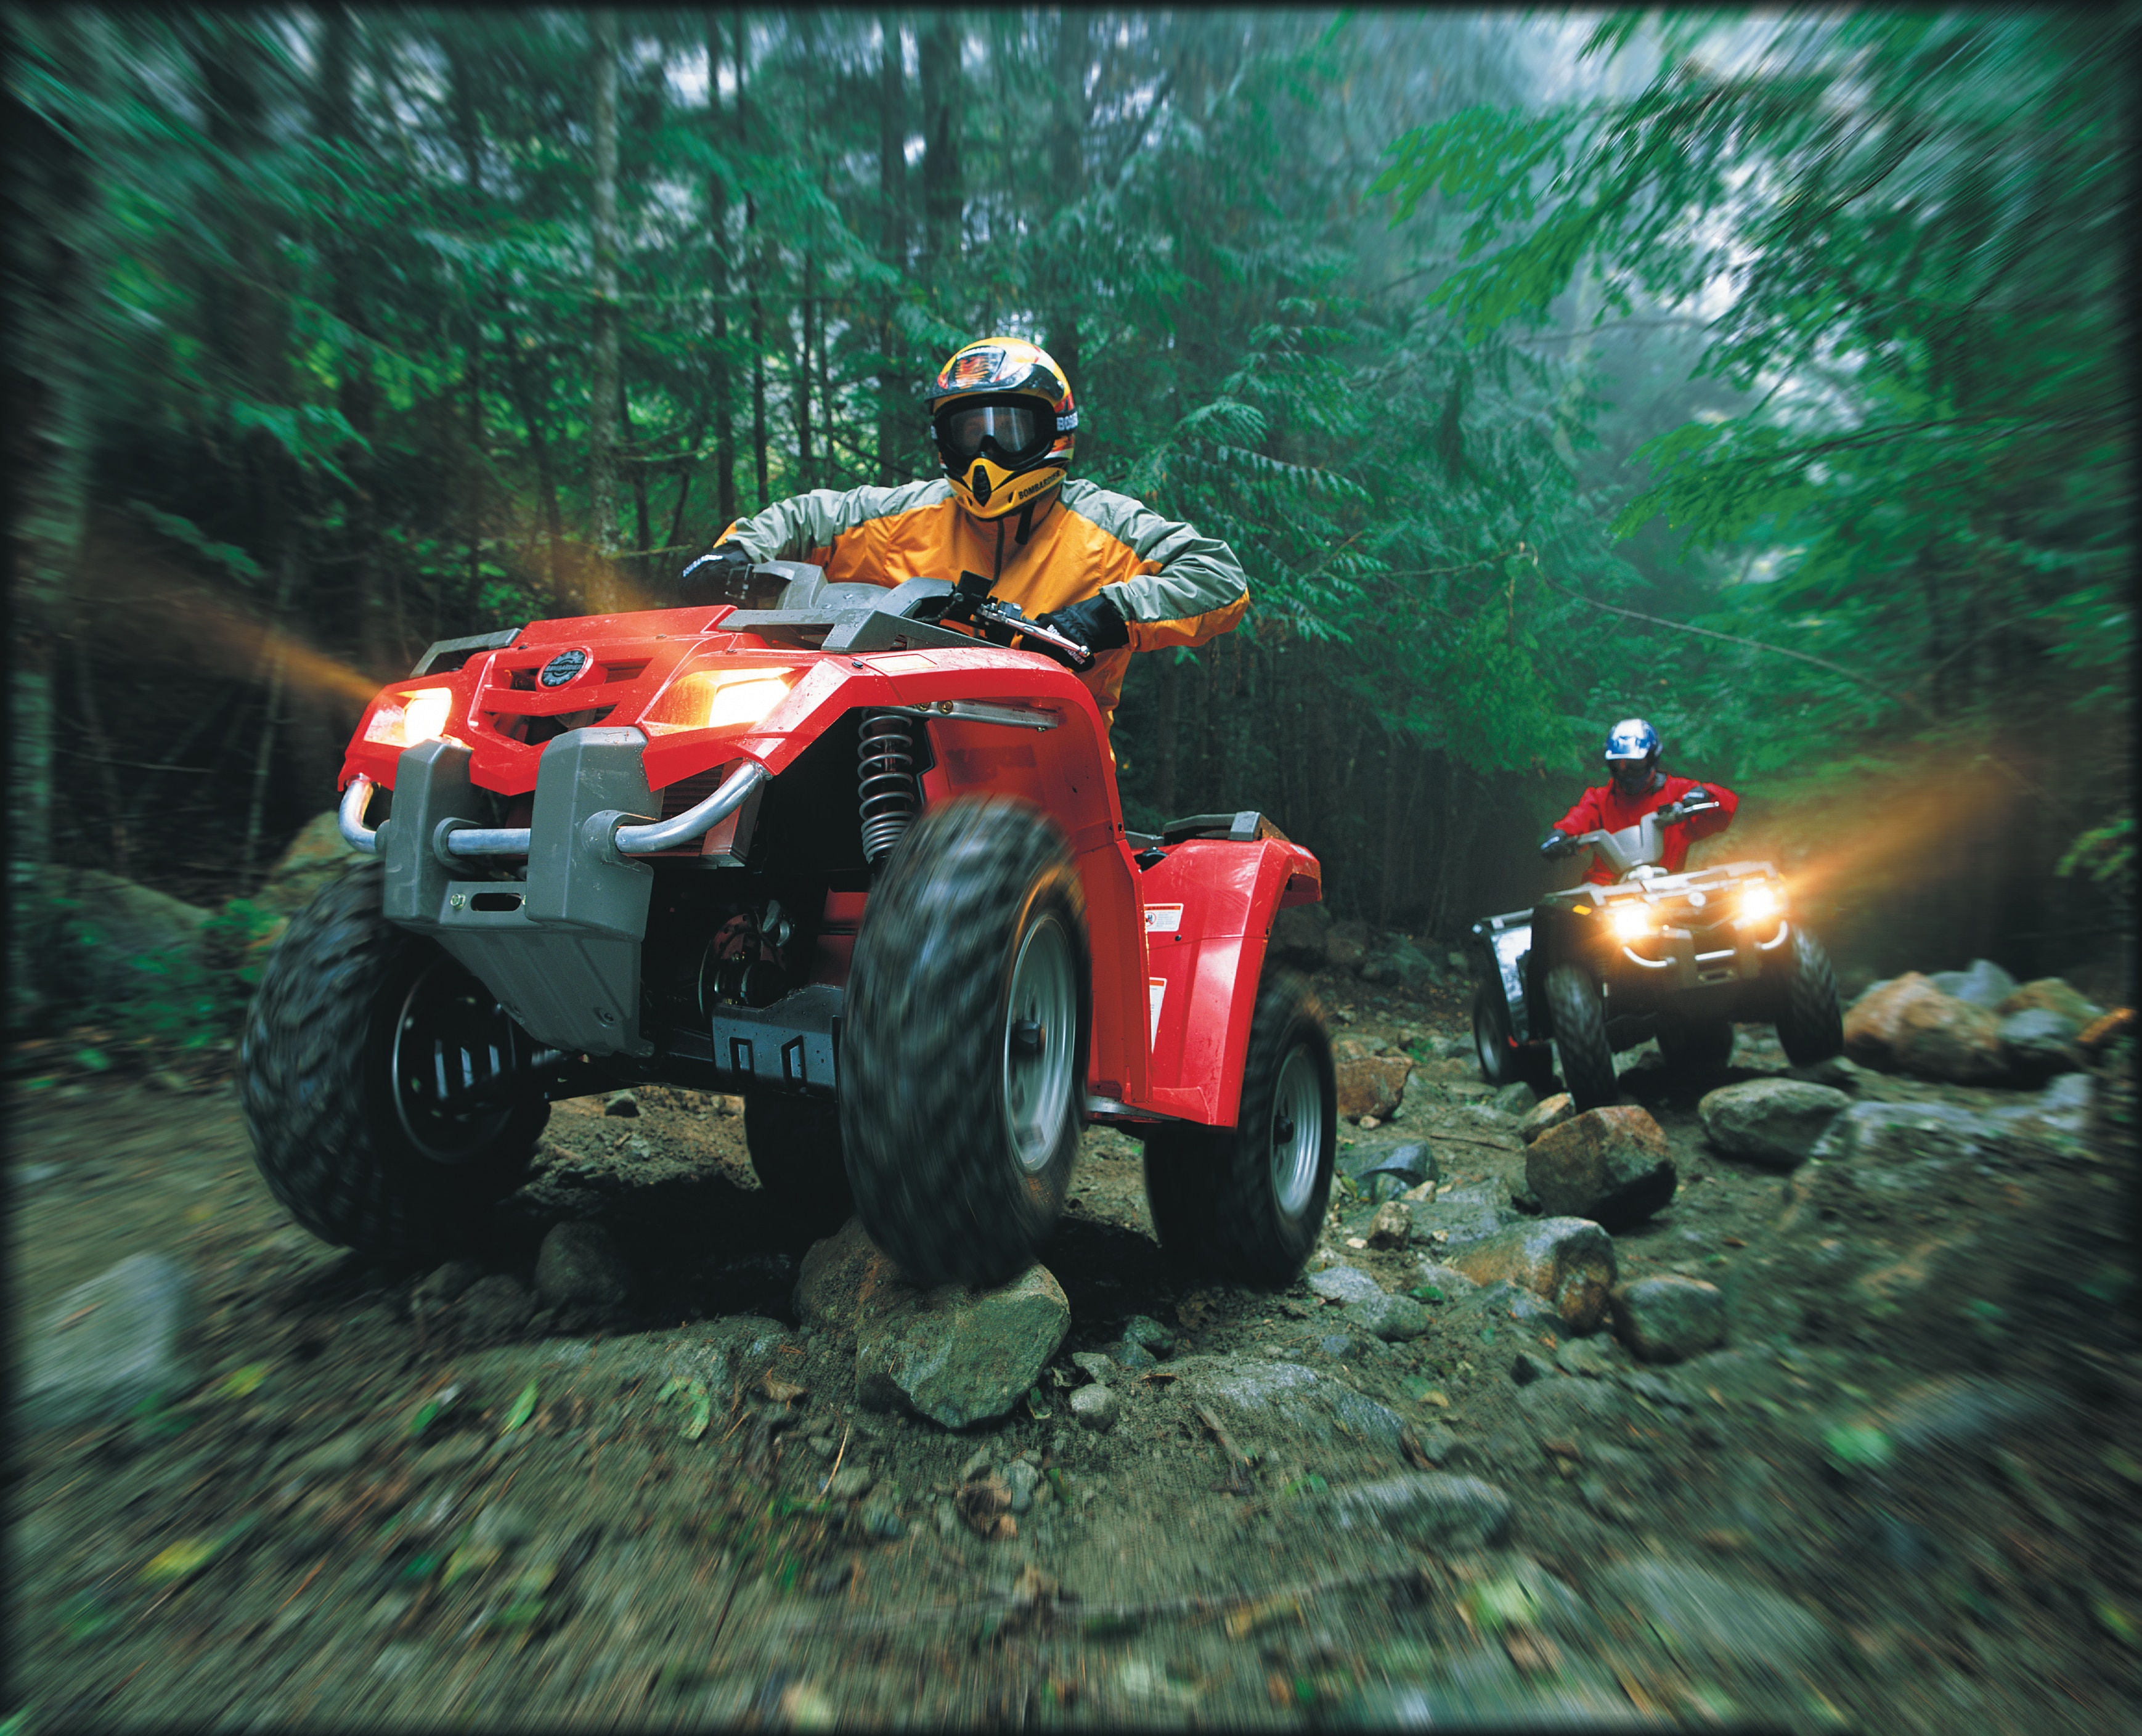 Two Can-Am ATV riding in a rocky forest